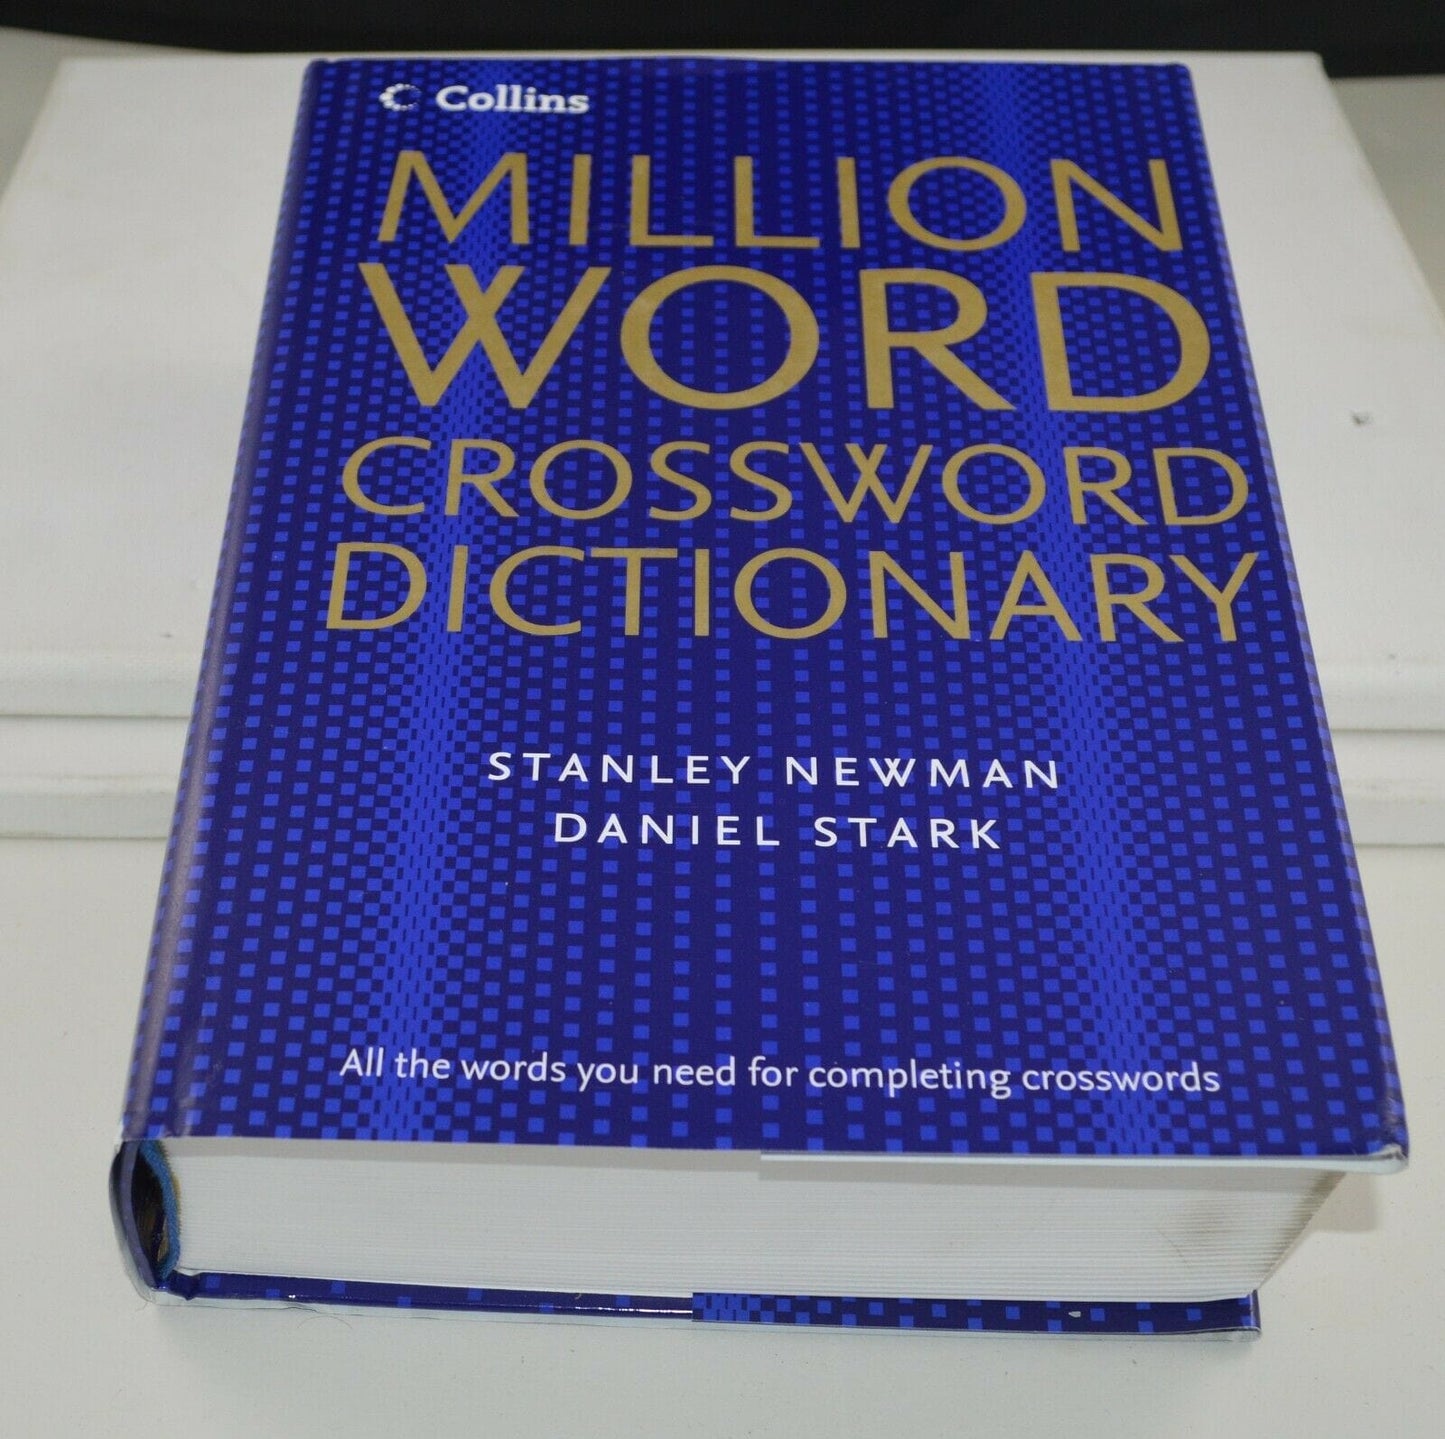 SECONDHAND BOOK COLLINS MILLION WORD CROSSWORD DICTIONARY(PREVIOUSLY OWNED) GOOD CONDITION - TMD167207